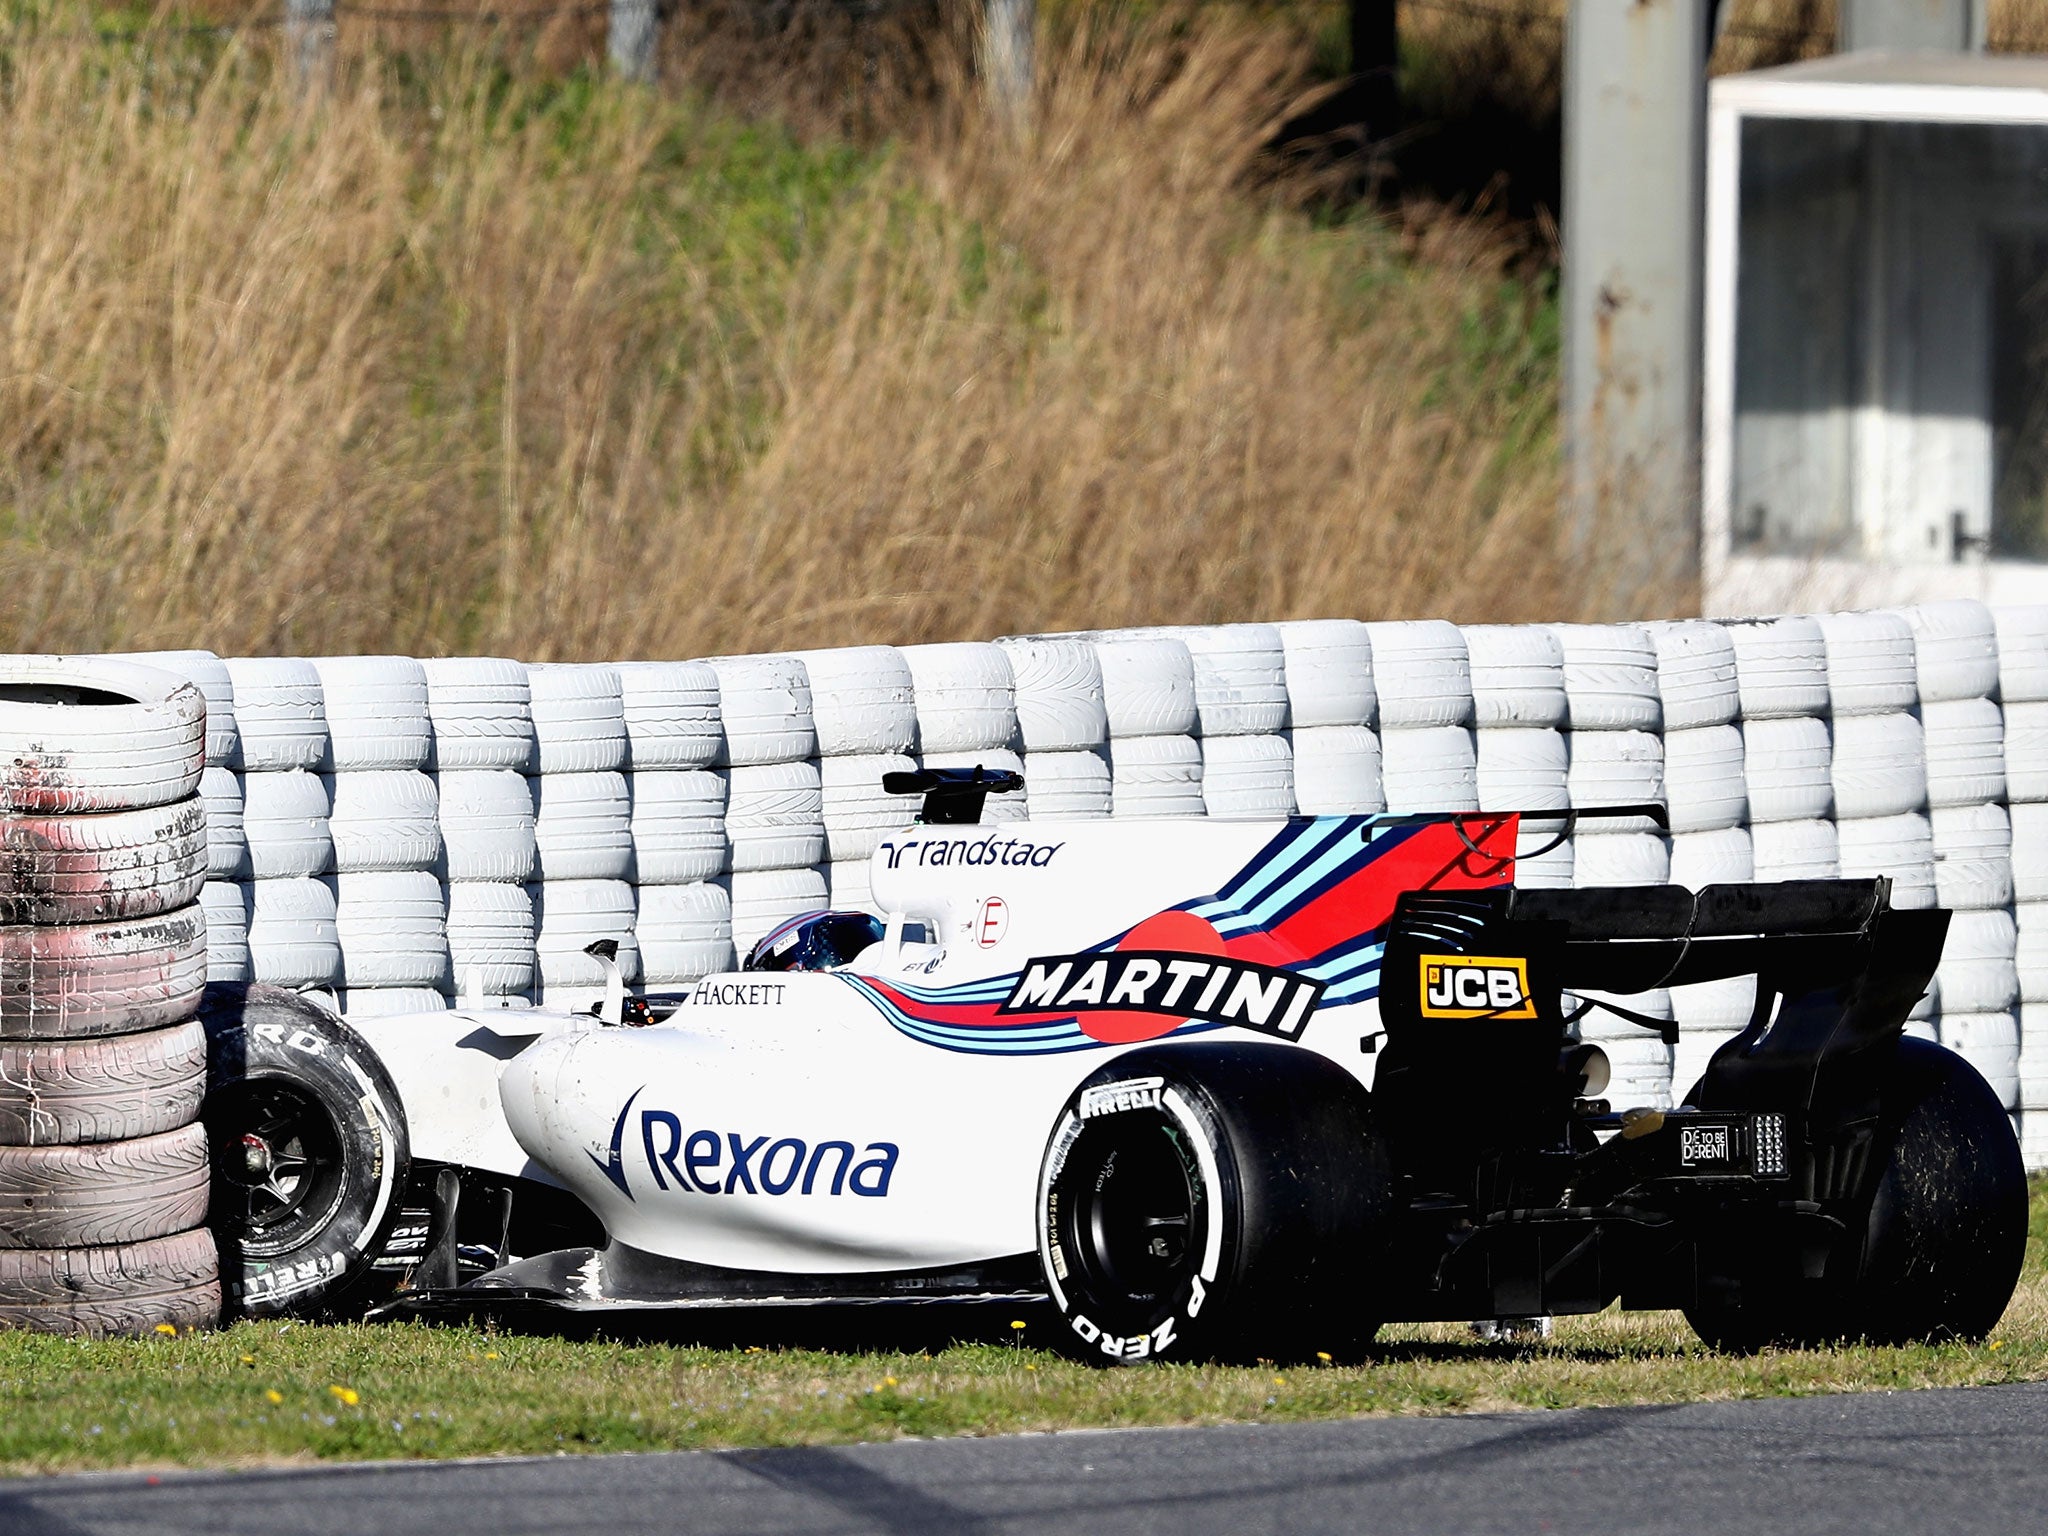 Lance Stroll crashed out of Wednesday's pre-season test at Barcelona